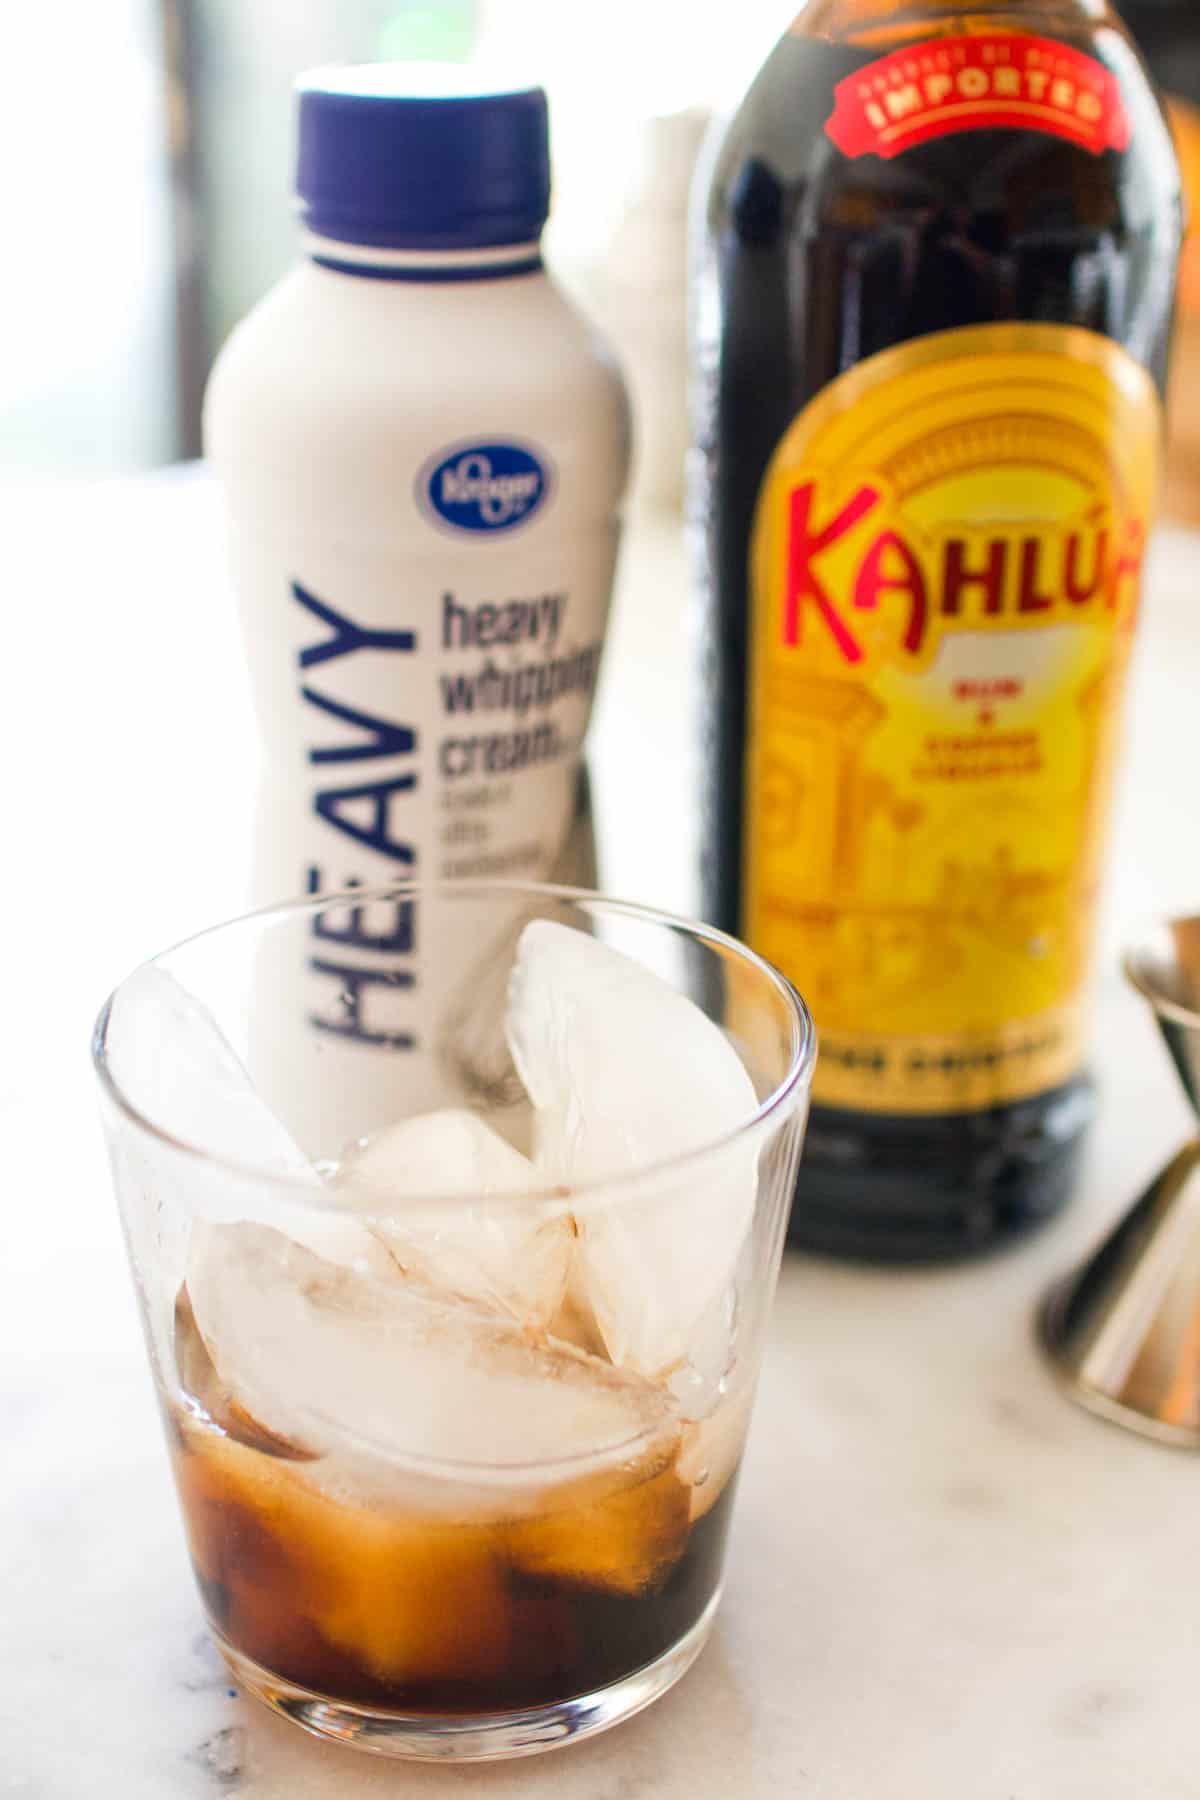 A cocktail glass on the counter with ice and Kahlua in it with bottles of Kahlua and heavy cream next to it.